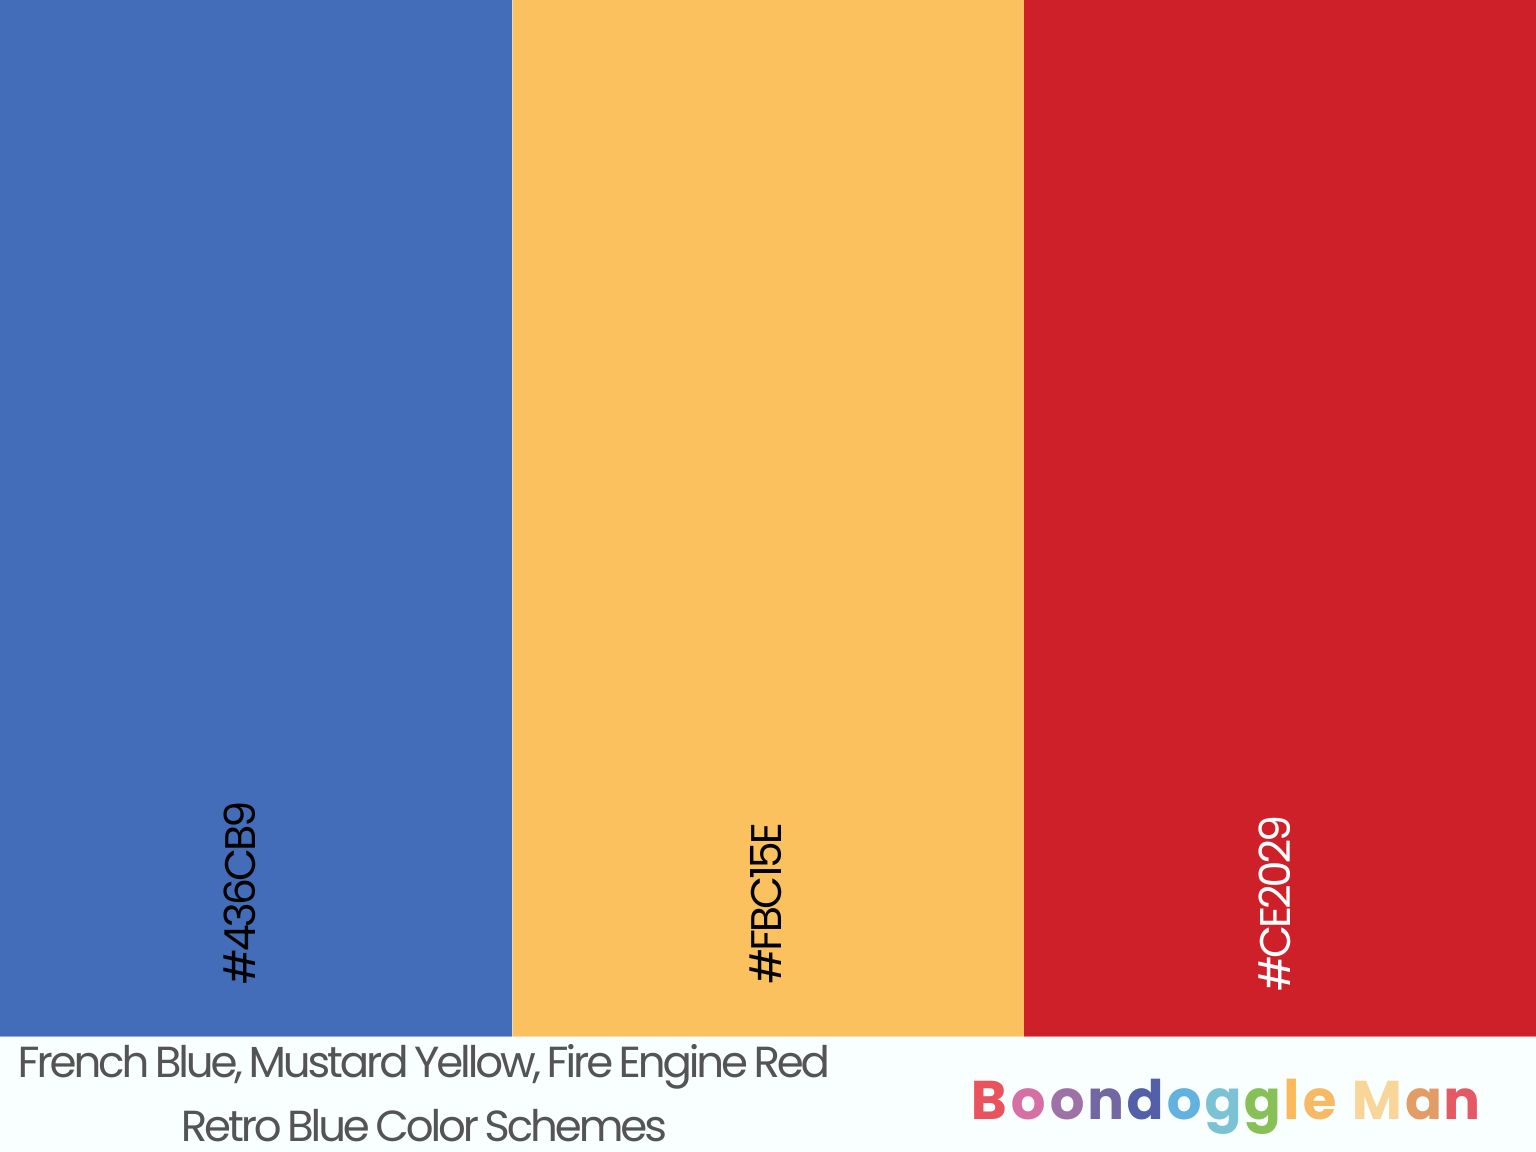 French Blue, Mustard Yellow, Fire Engine Red